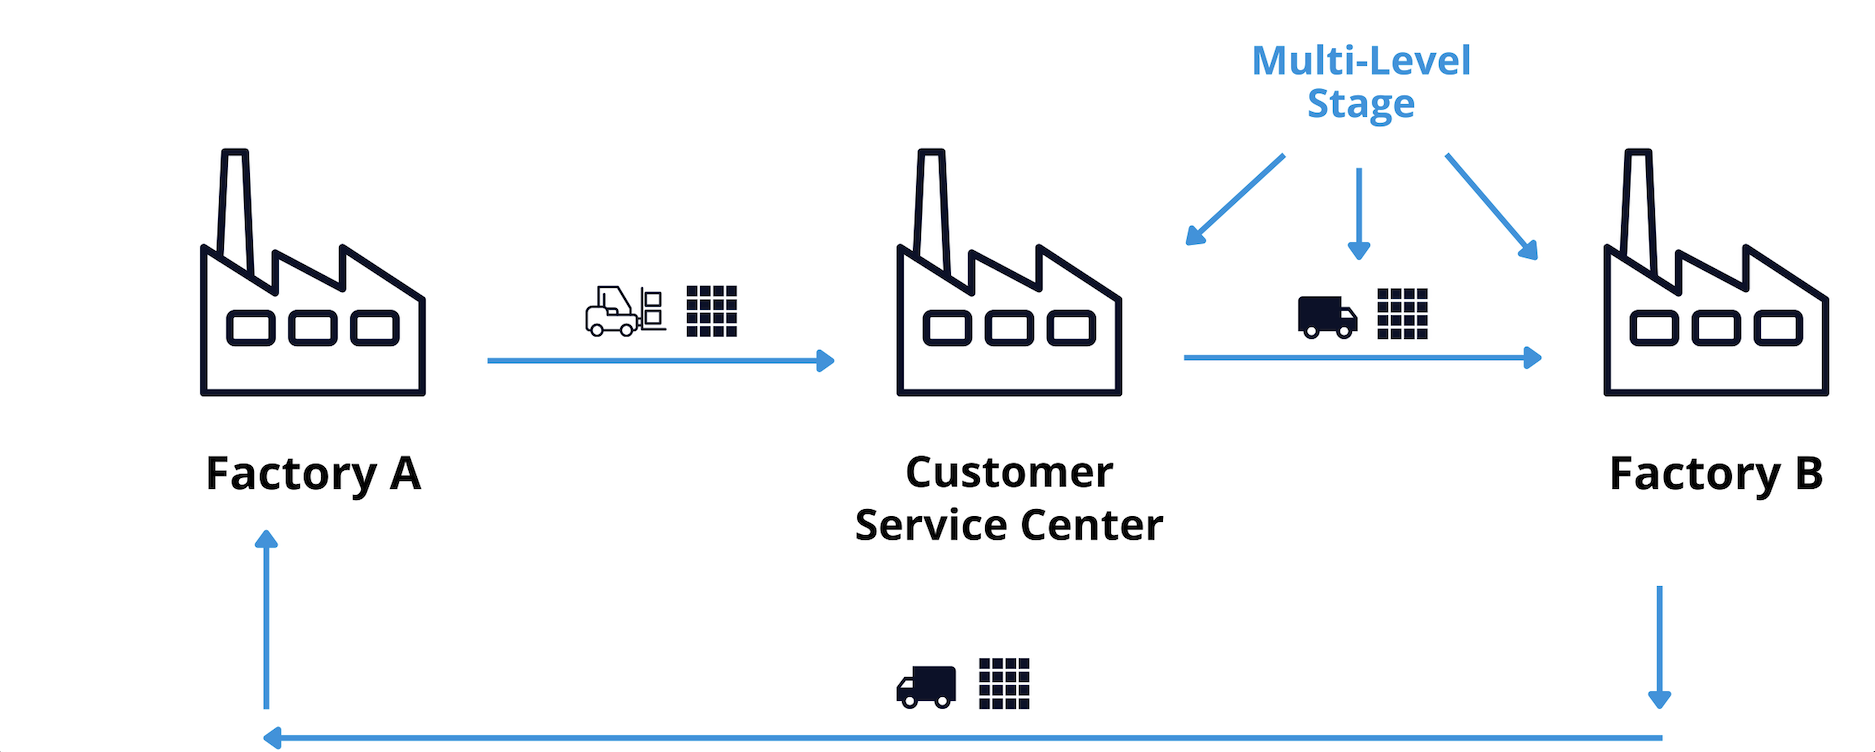 Asset Tracking: The IoT sensor-based INTRANAV RTLS solution tracks the packages indoors and in real-time from their starting point to their destination point (Factory A – Factory B – Customer Service Center) as well as via all intermediate nodes (warehouse levels/buffers).